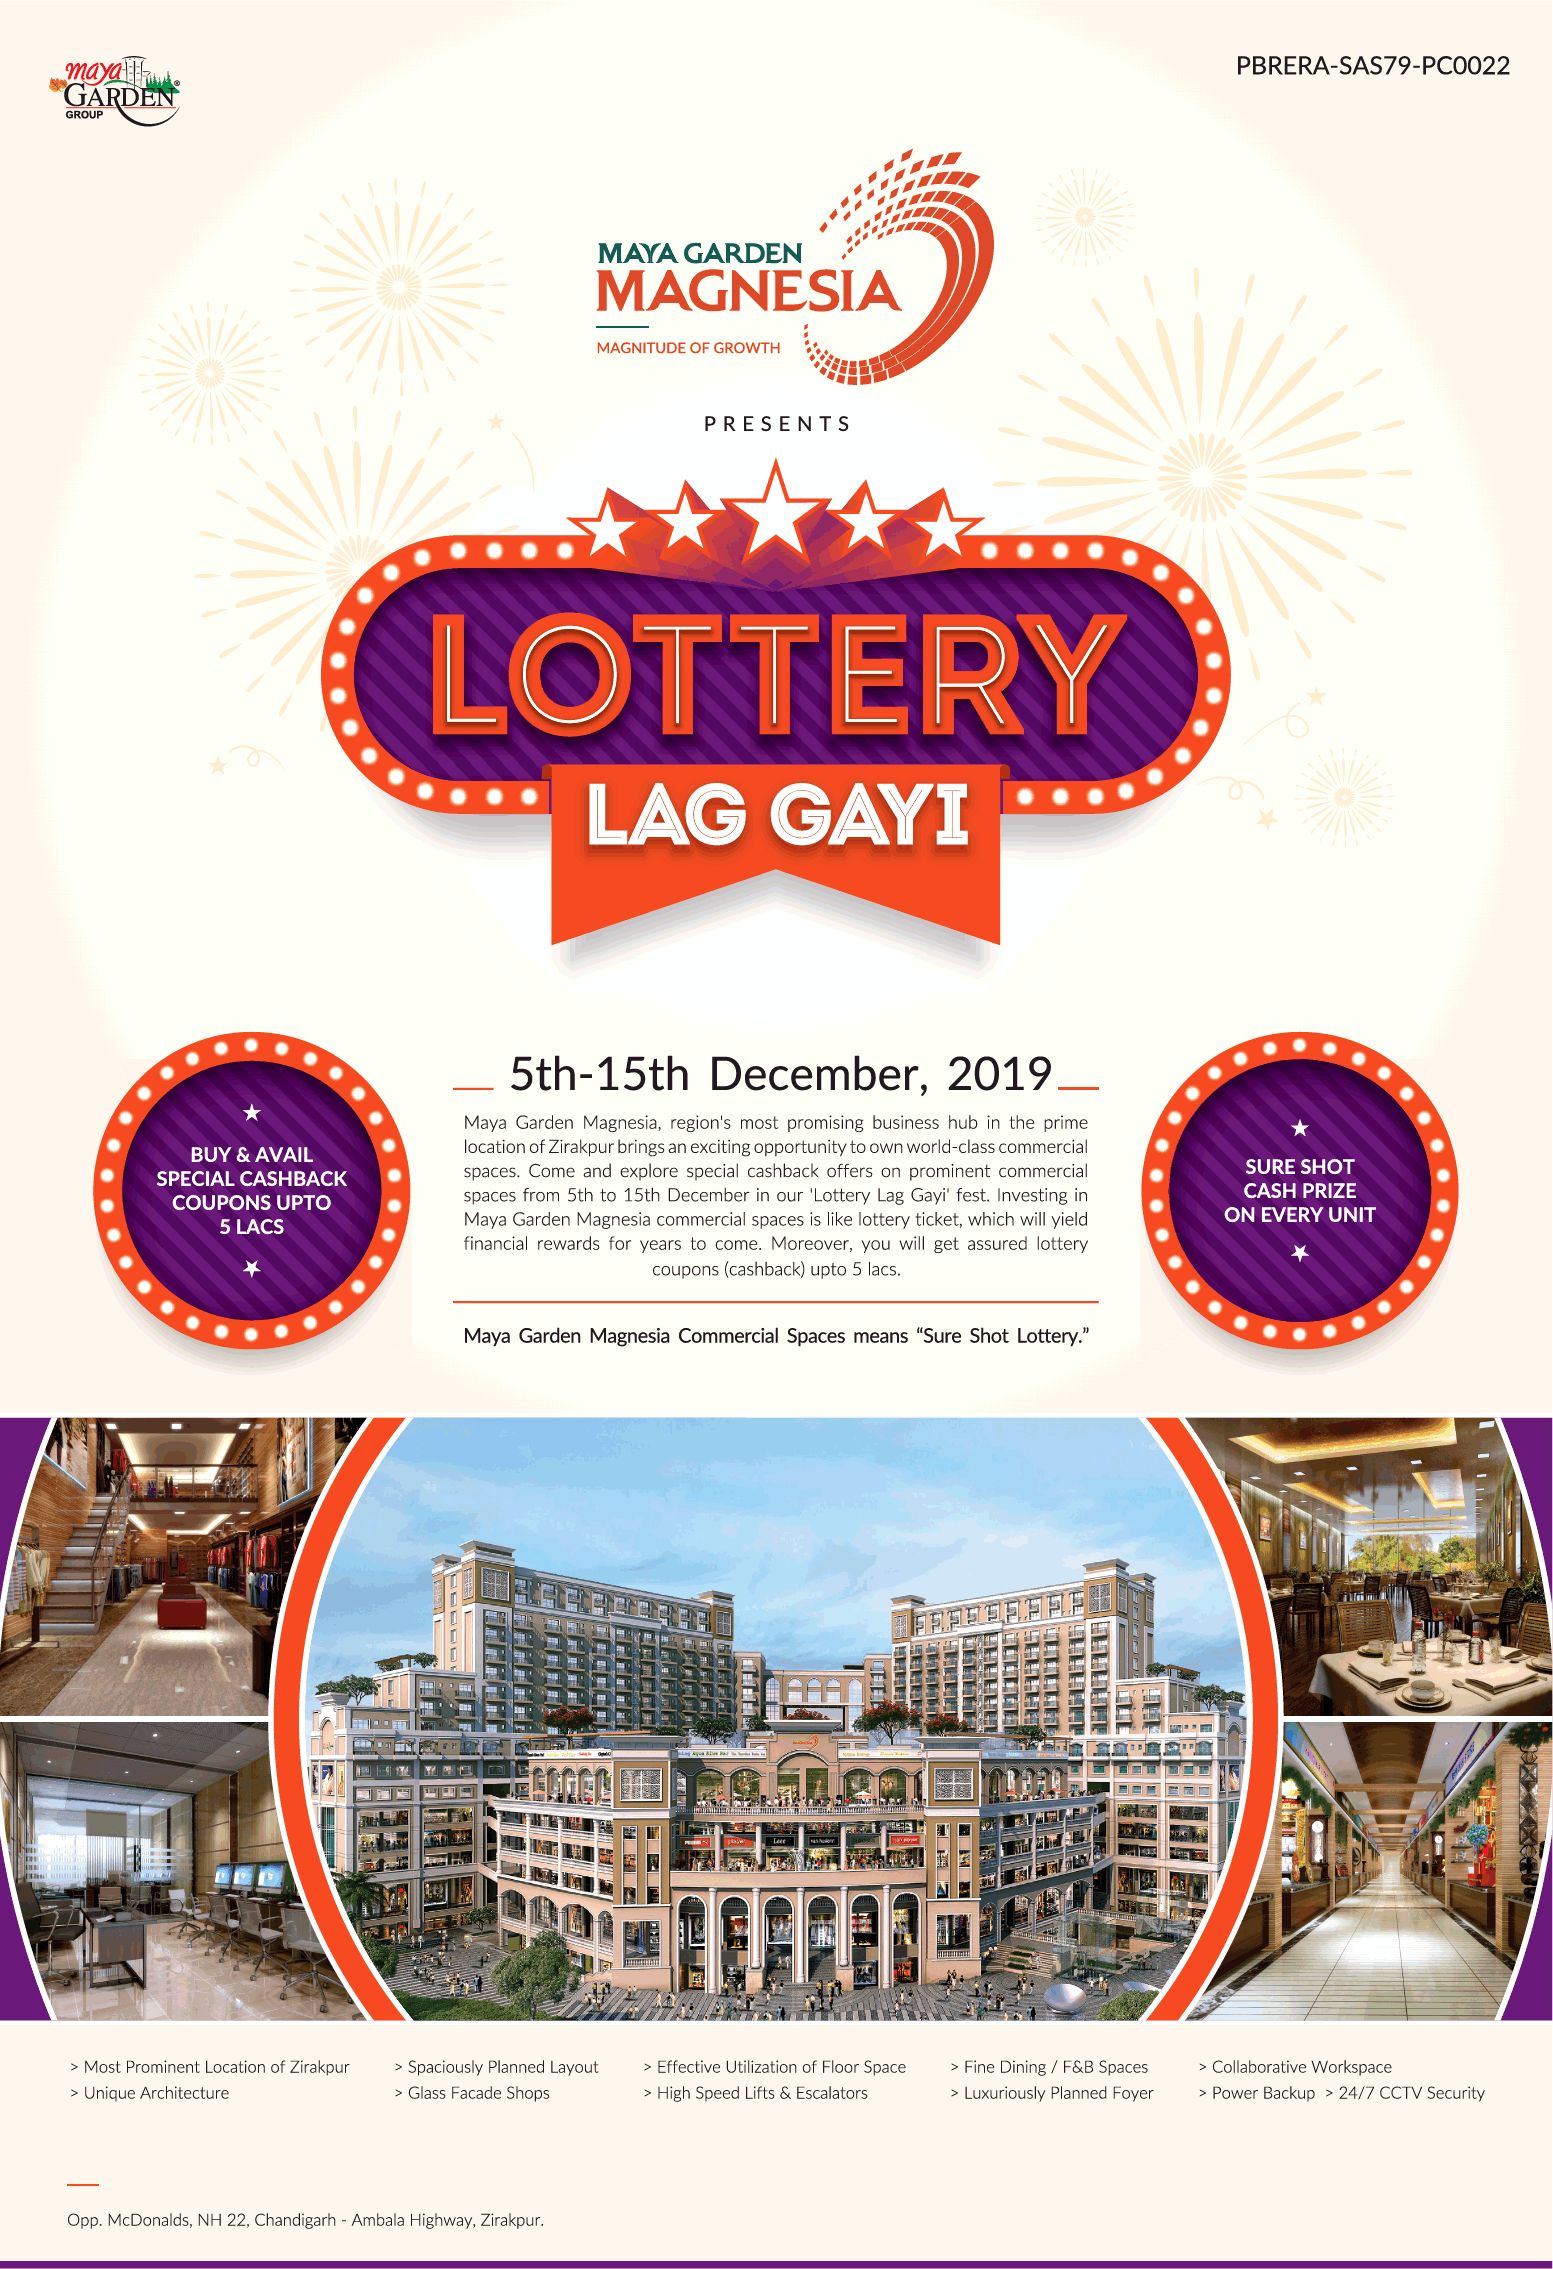 Buy & avail special cashback coupons upto 5 Lacs at Maya Garden Magnesia, Chandigarh